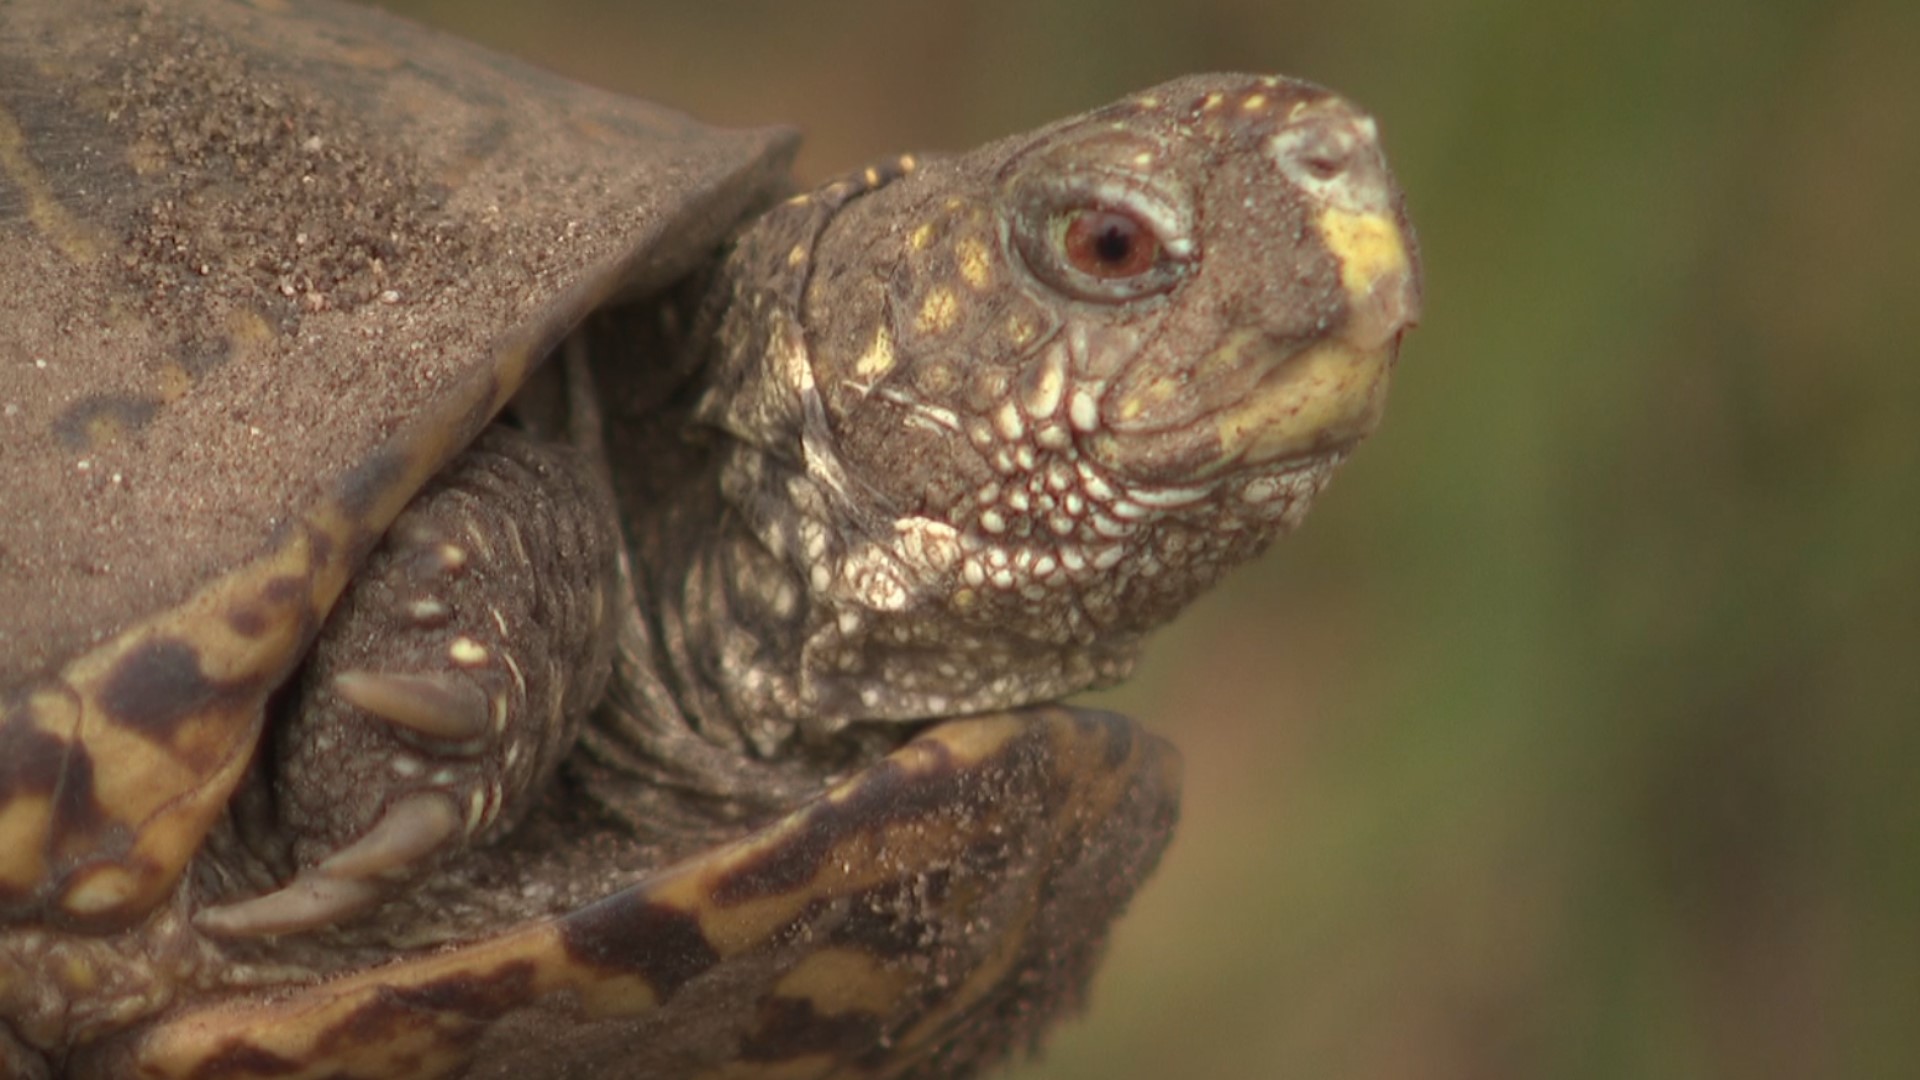 In northern IL, roughly 80 of the tiny turtles live in a 19-acre enclosure. They hibernate underground, forcing biologists to track them with radio transmitters.